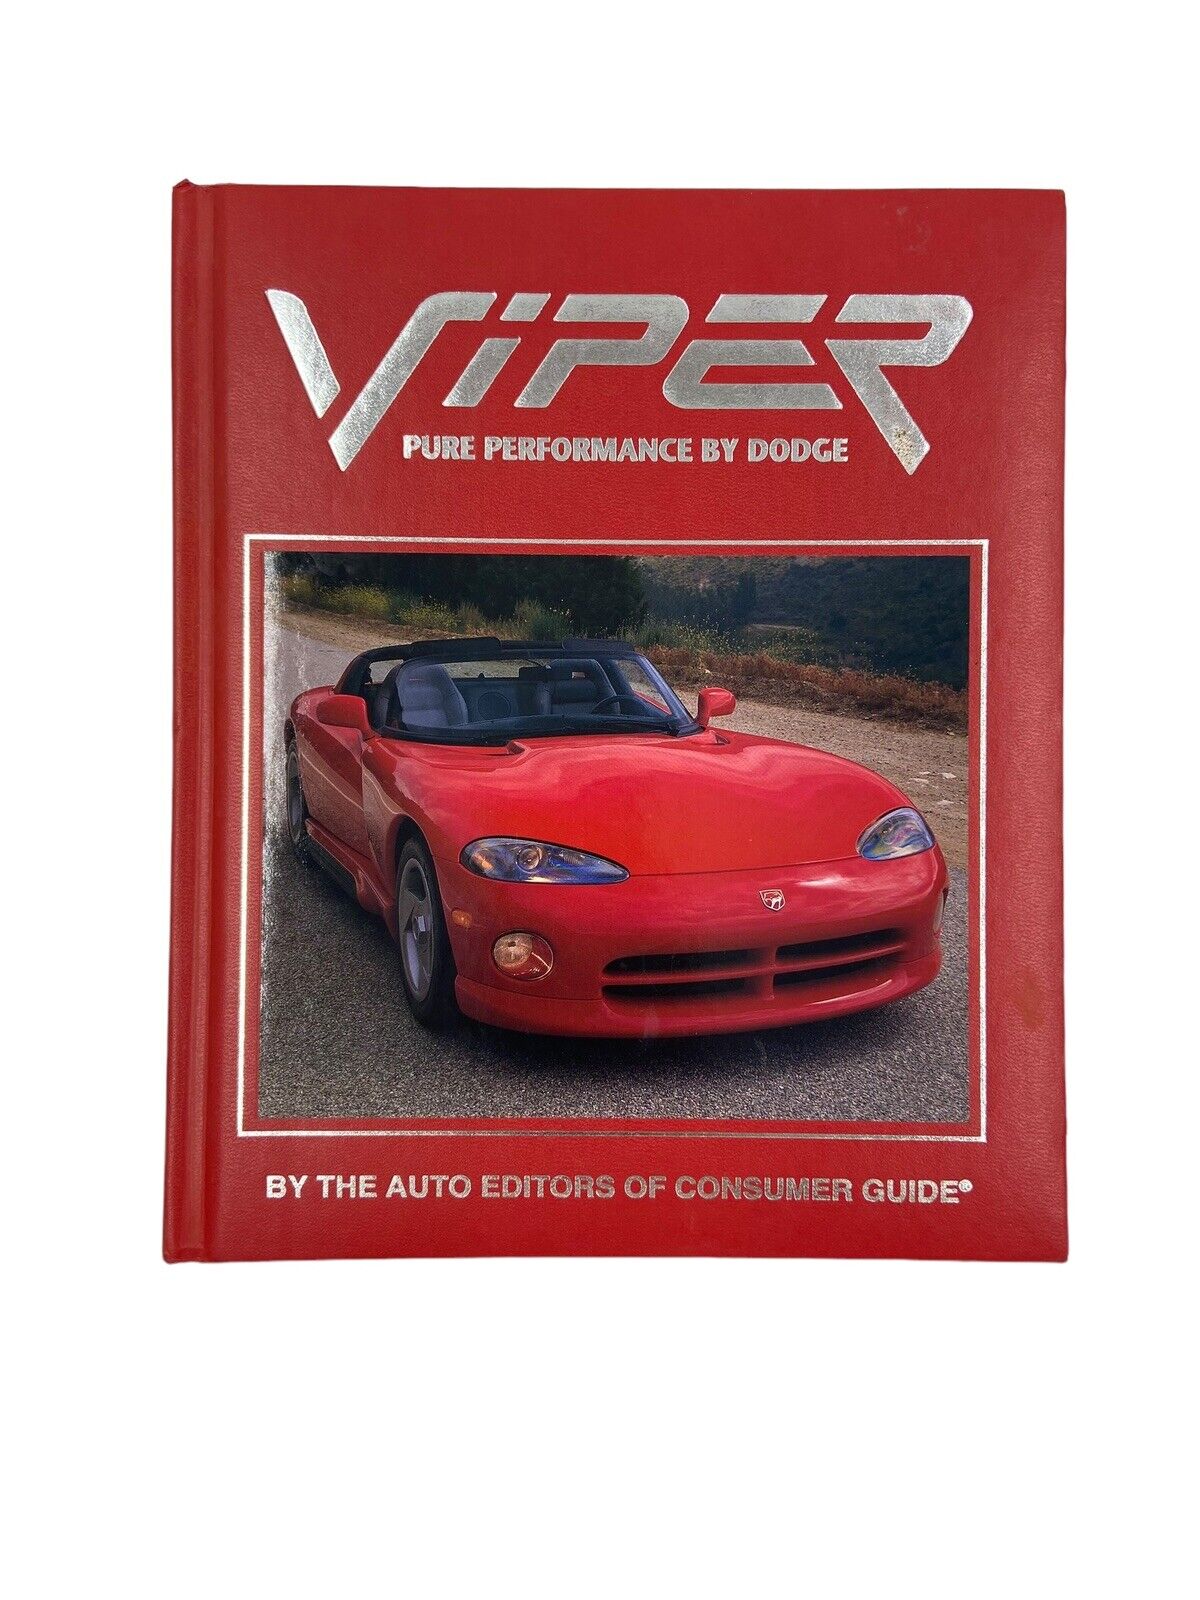 VIPER PURE PERFORMANCE by DODGE 1993 Hardcover Book Consumer Guide RT/10 Mopar